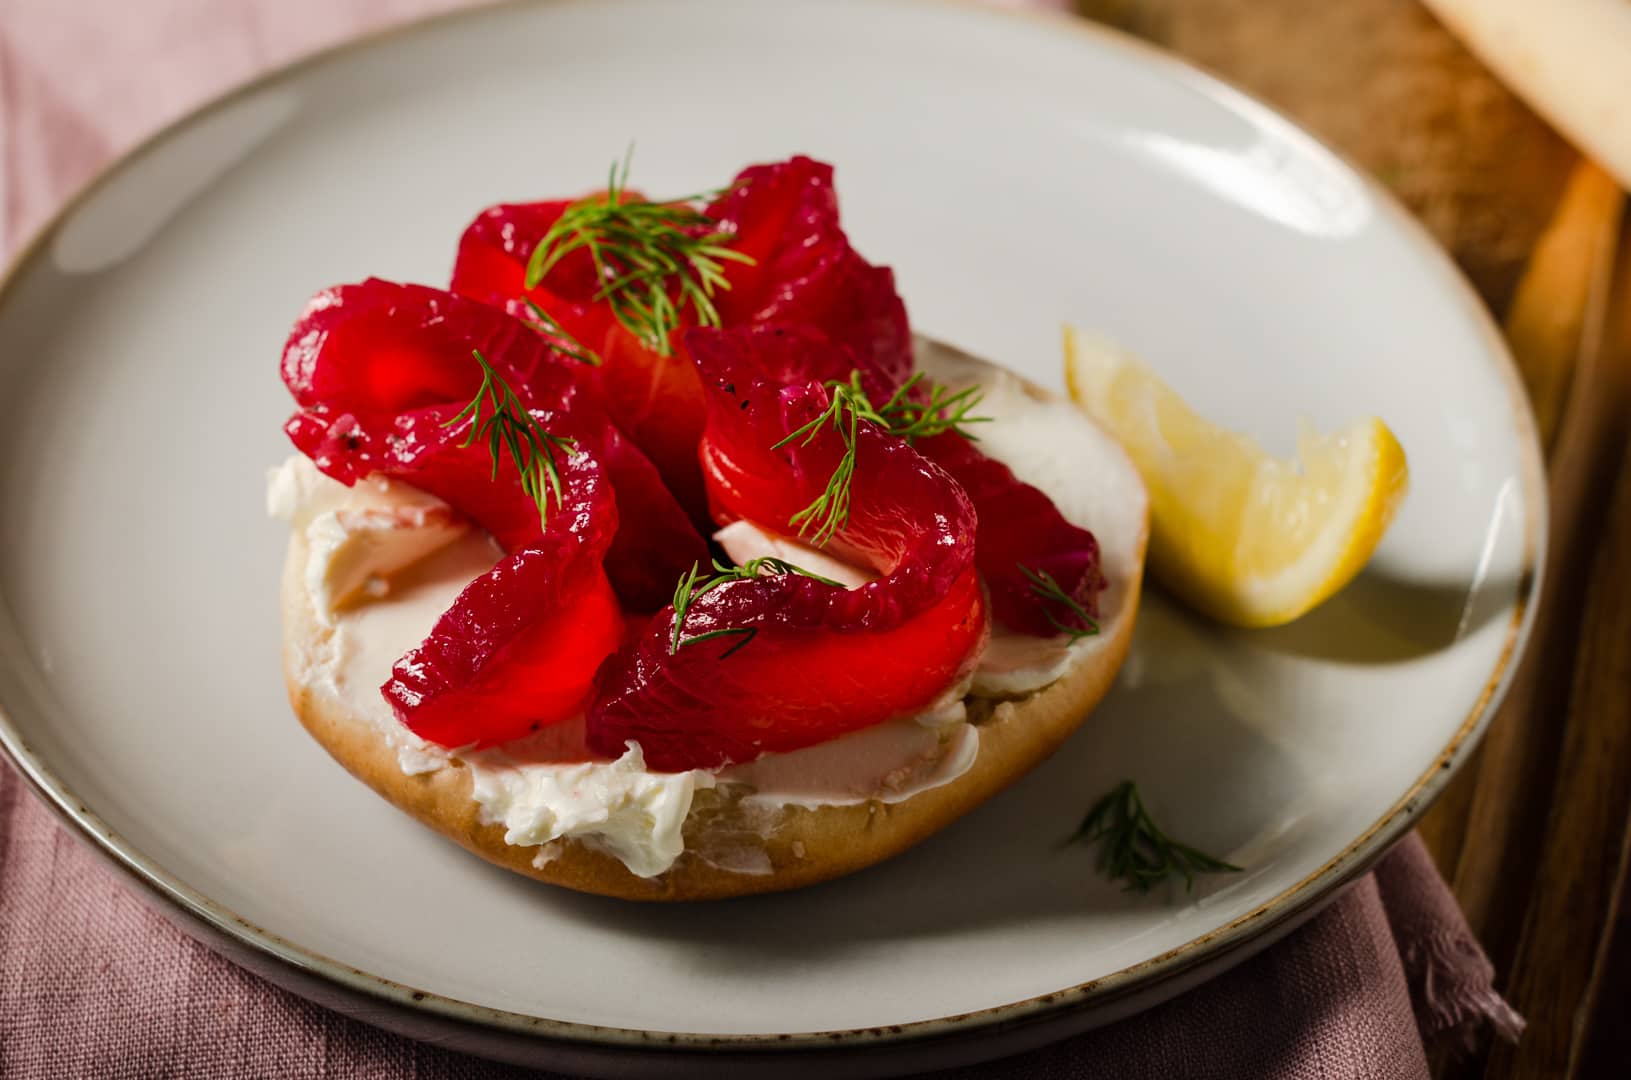 Beetroot cured salmon slices on a bagel with cream cheese and a slice of lemon wedge